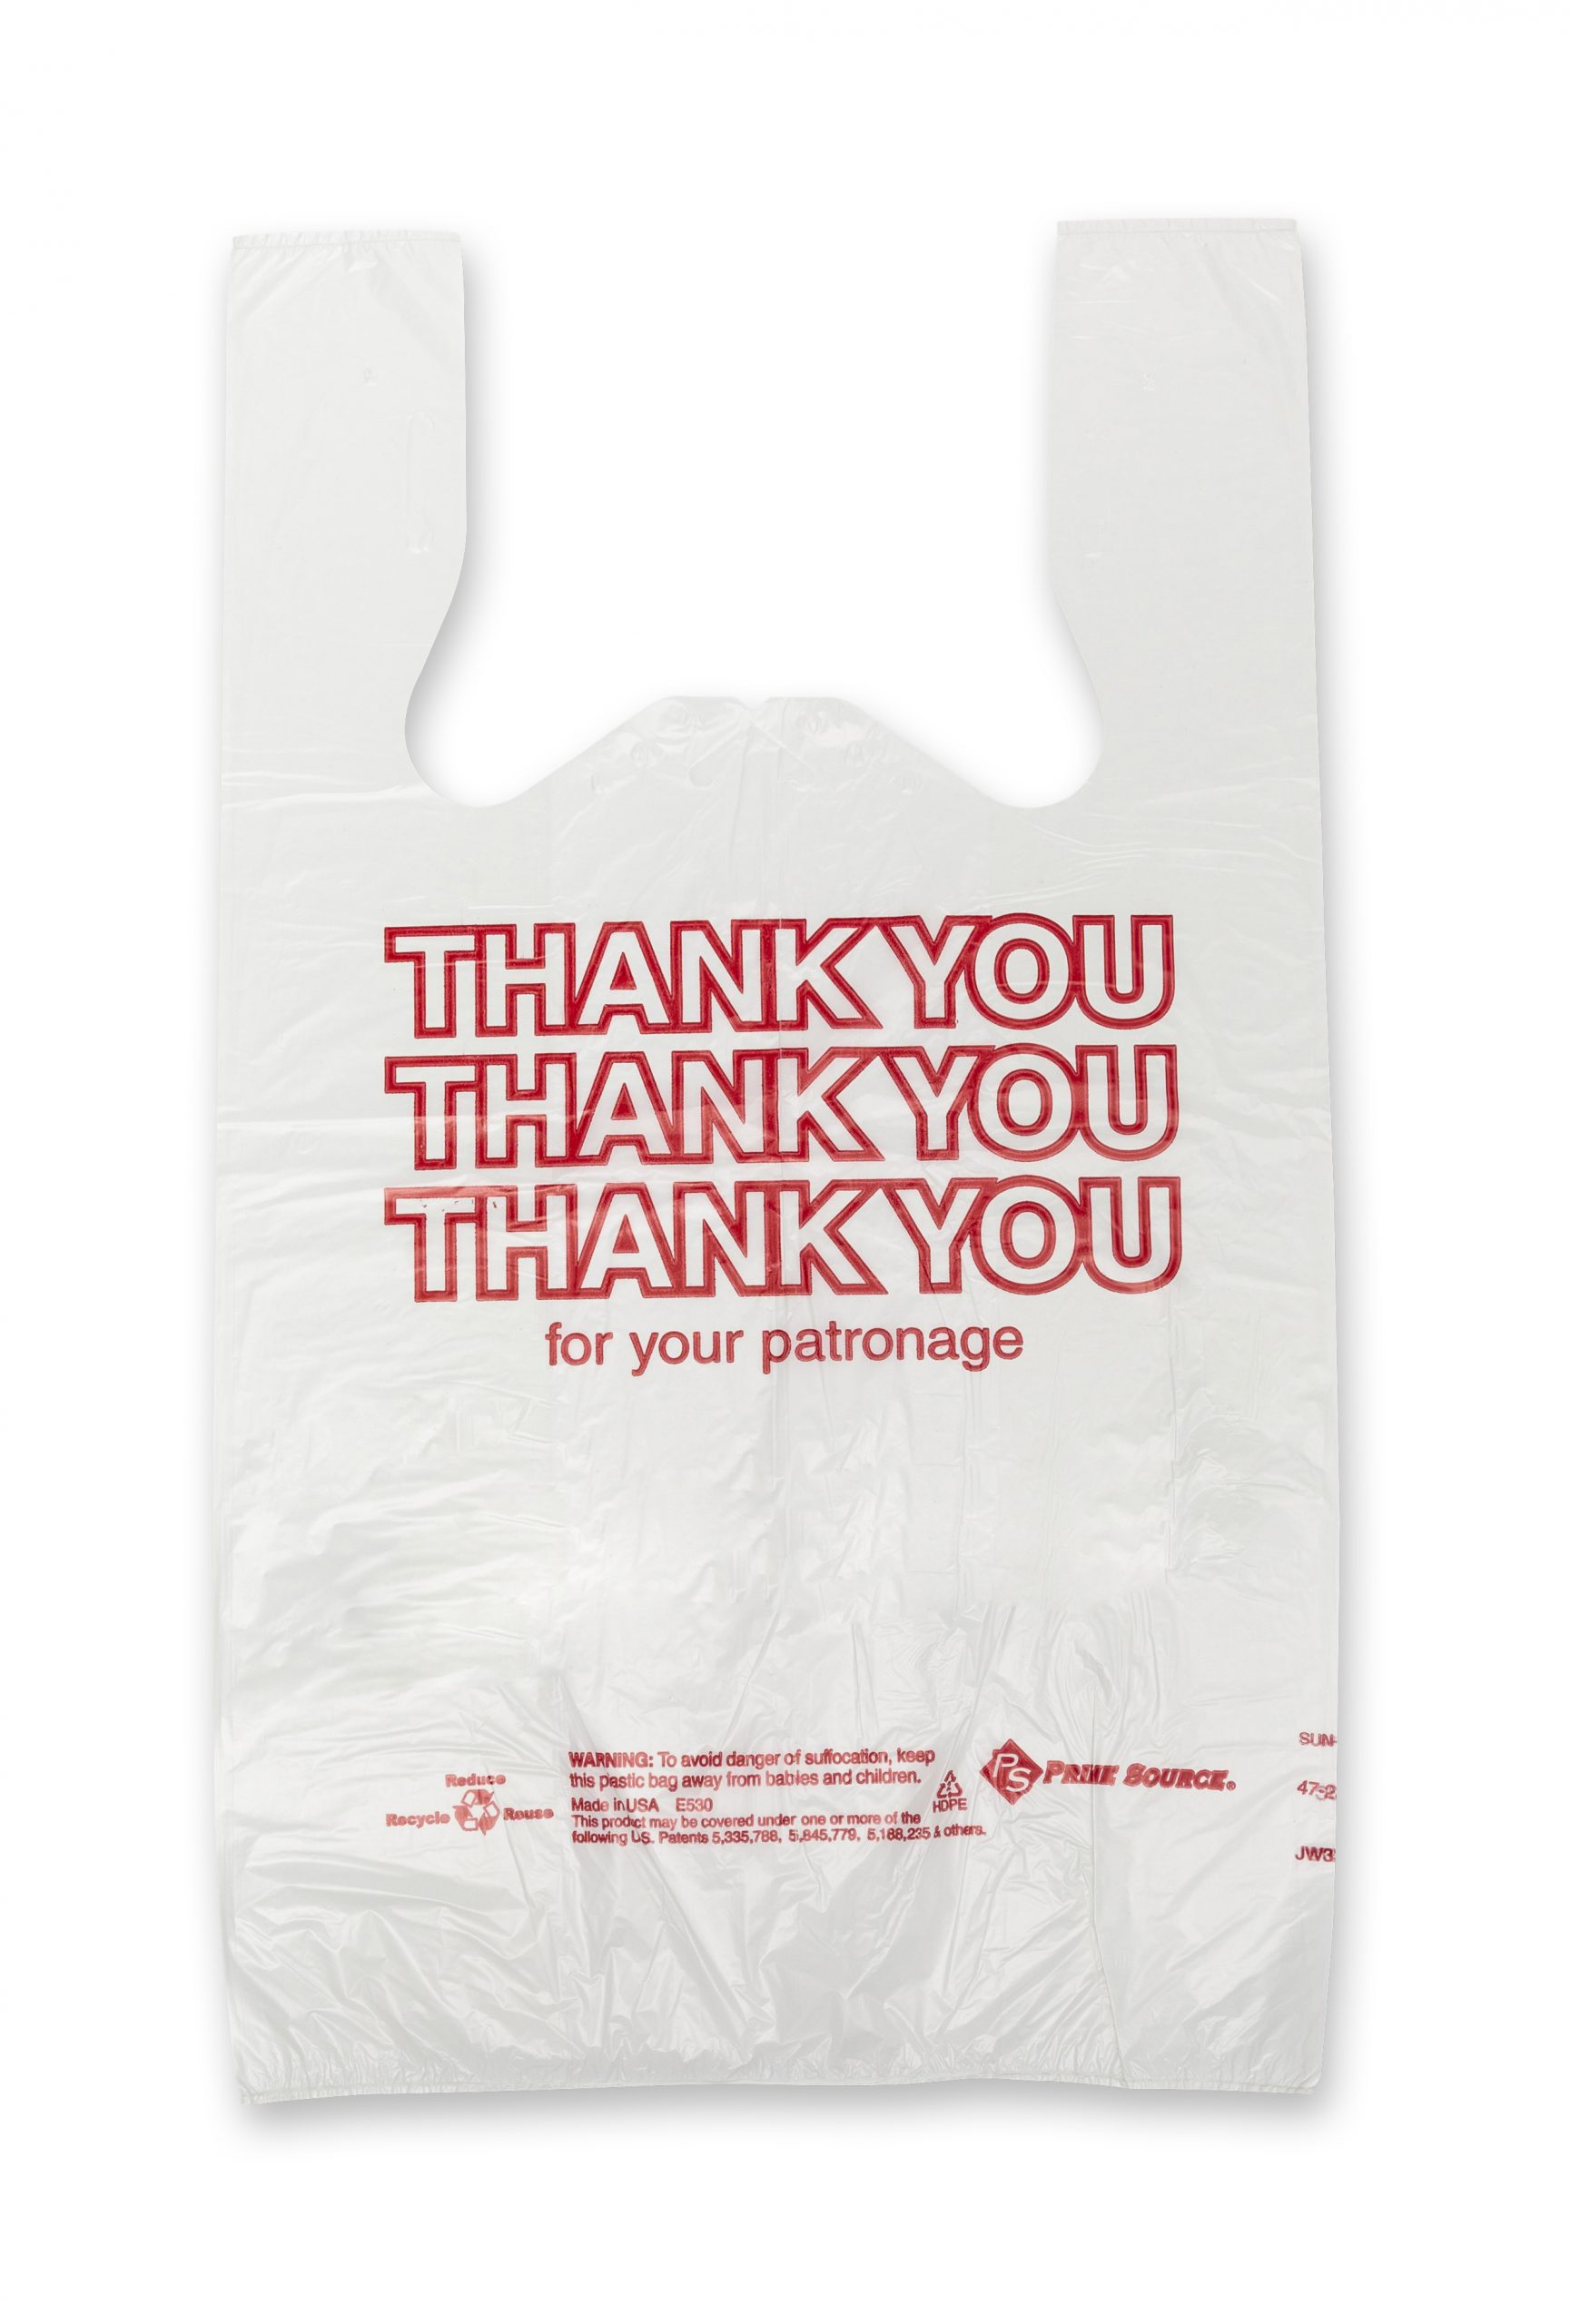 Plastic T Shirt “Thank You” Bags image